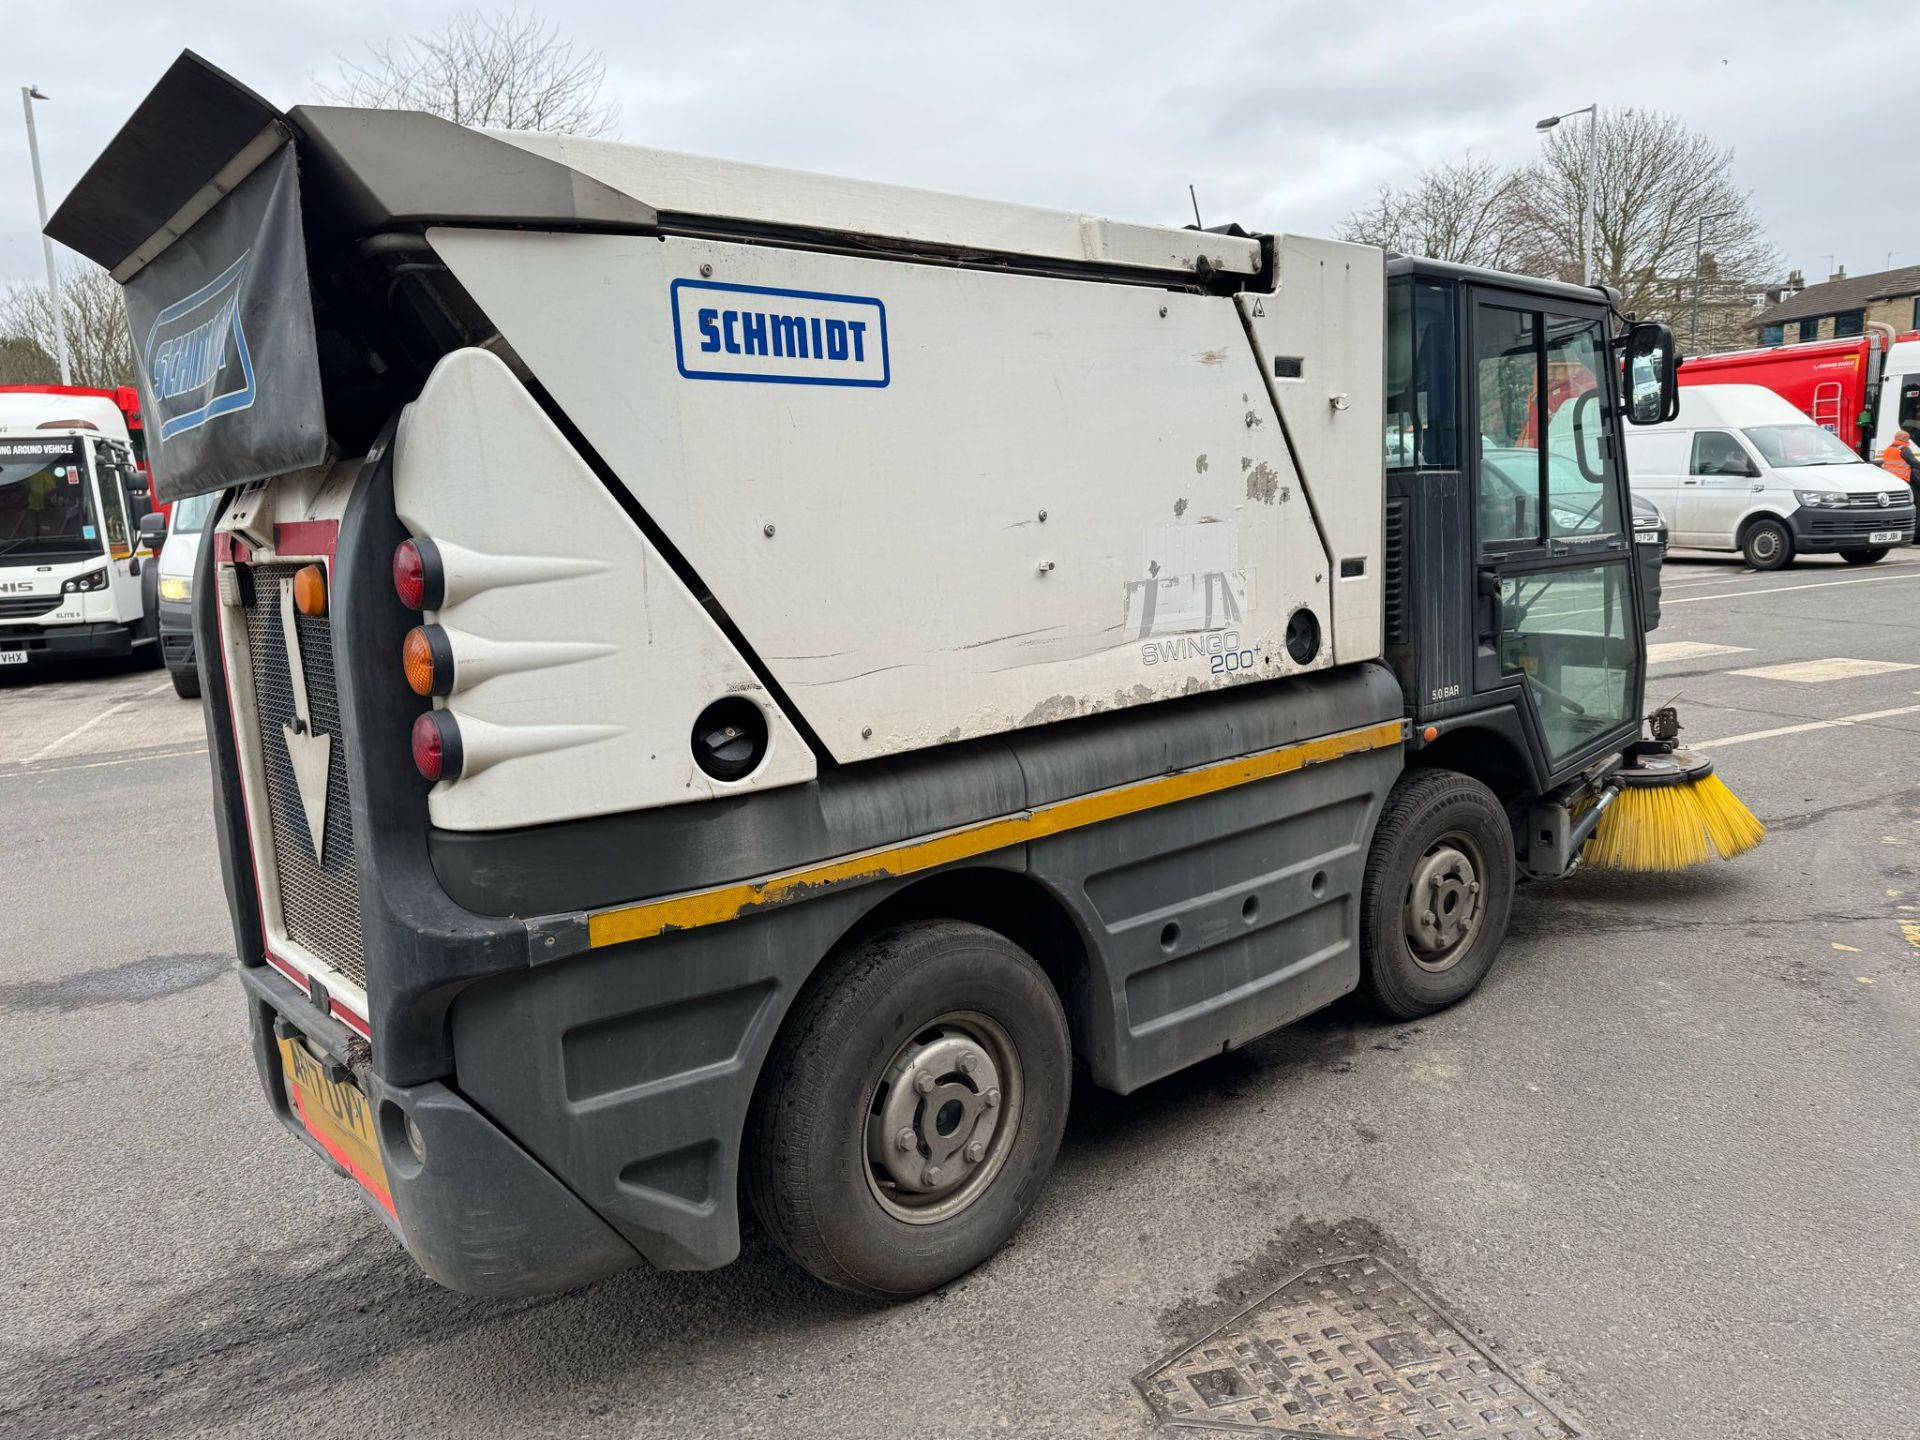 2017, SCHMIDT - Compact 200 Road Sweeper (Ex-Council fleet owned and maintained) - Image 3 of 32